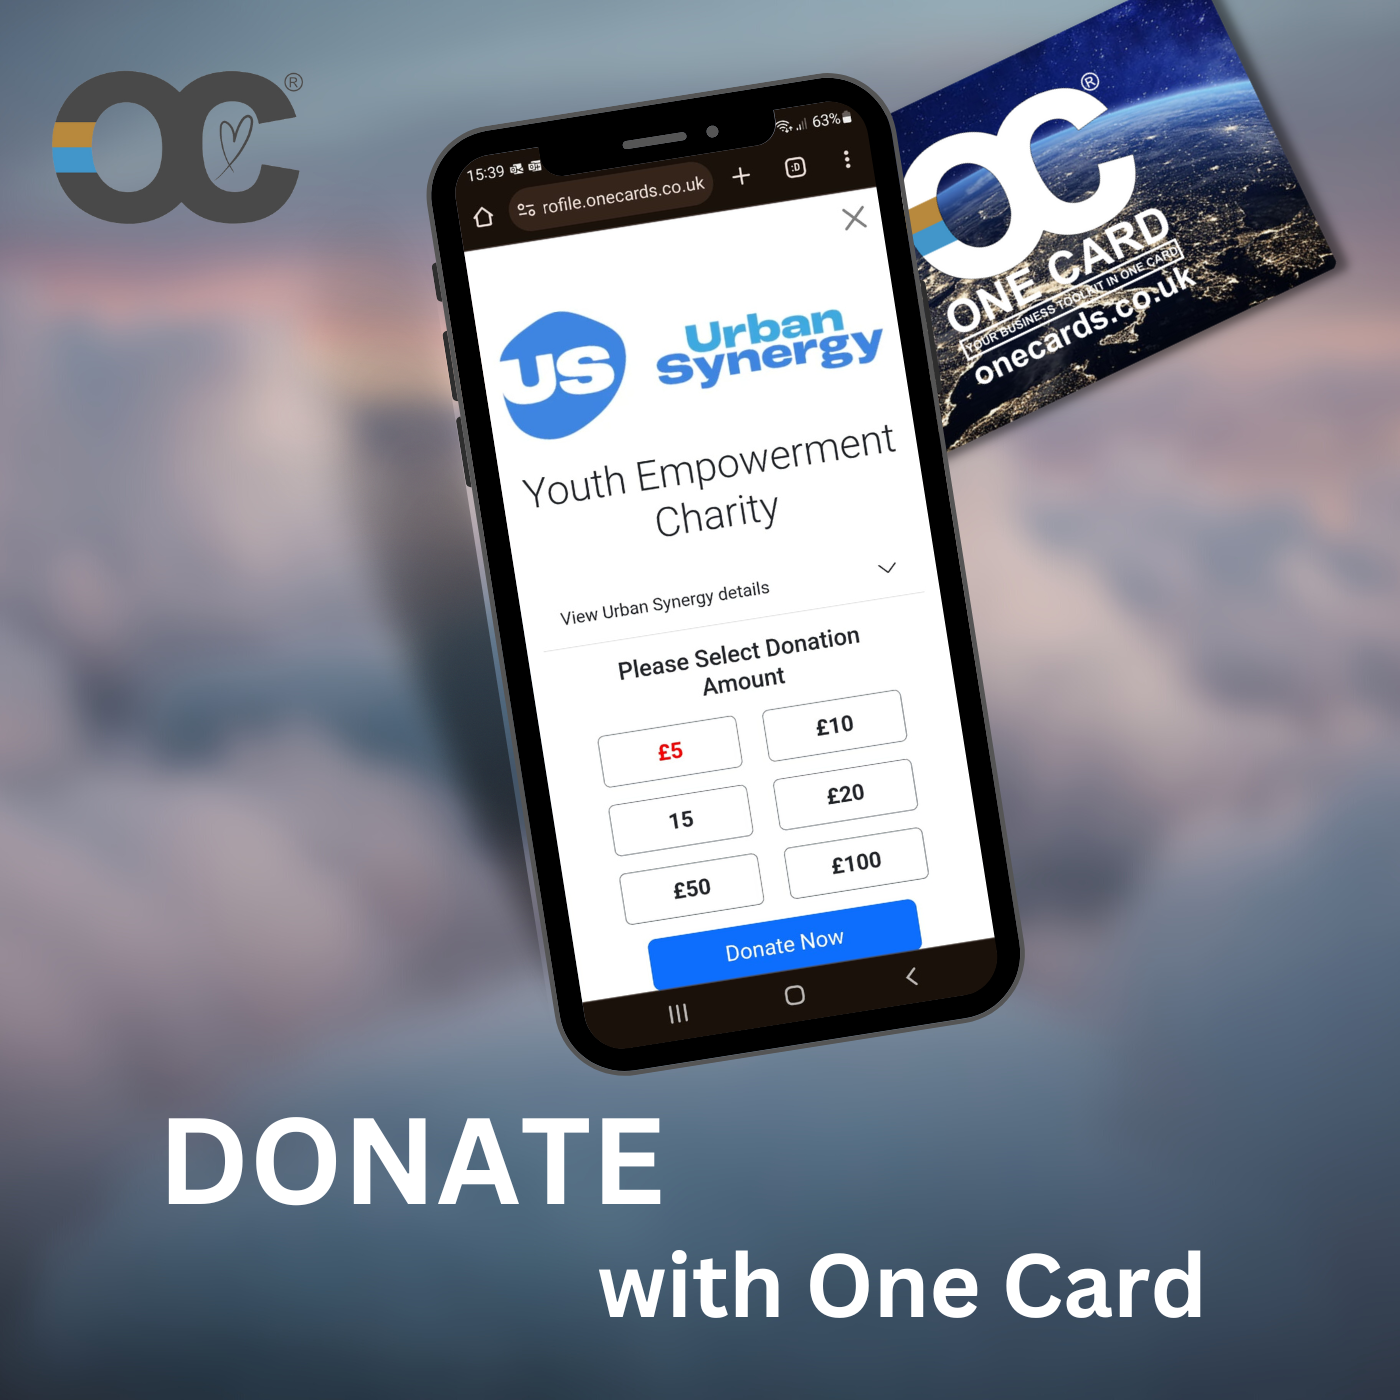 Donate with One Card. Making donations to charities and payments simple.